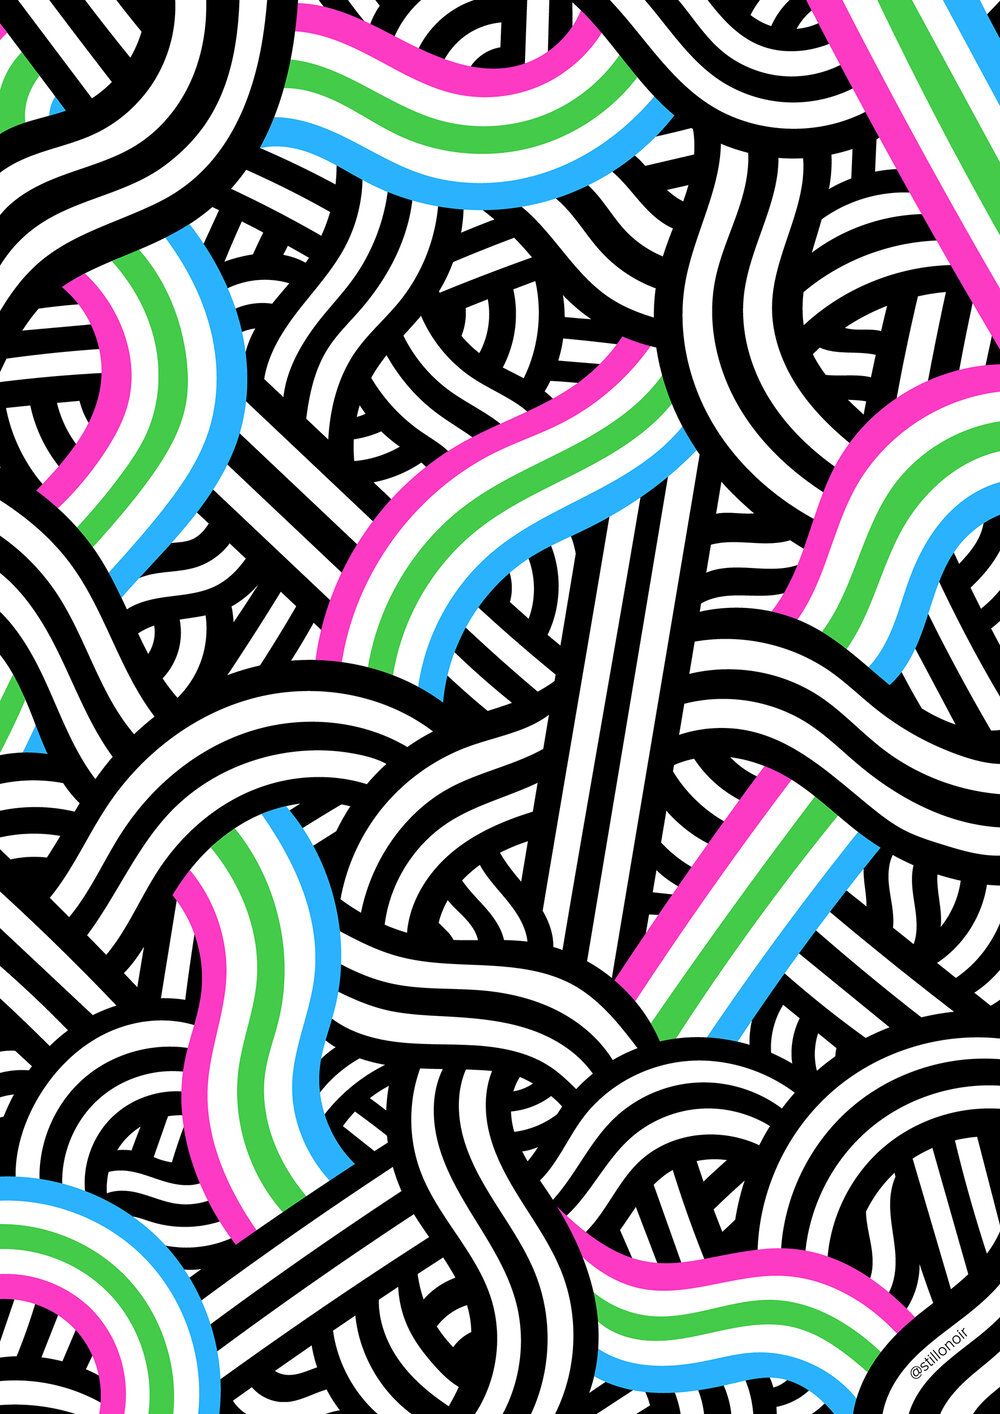 A black and white pattern with colorful lines - Pride